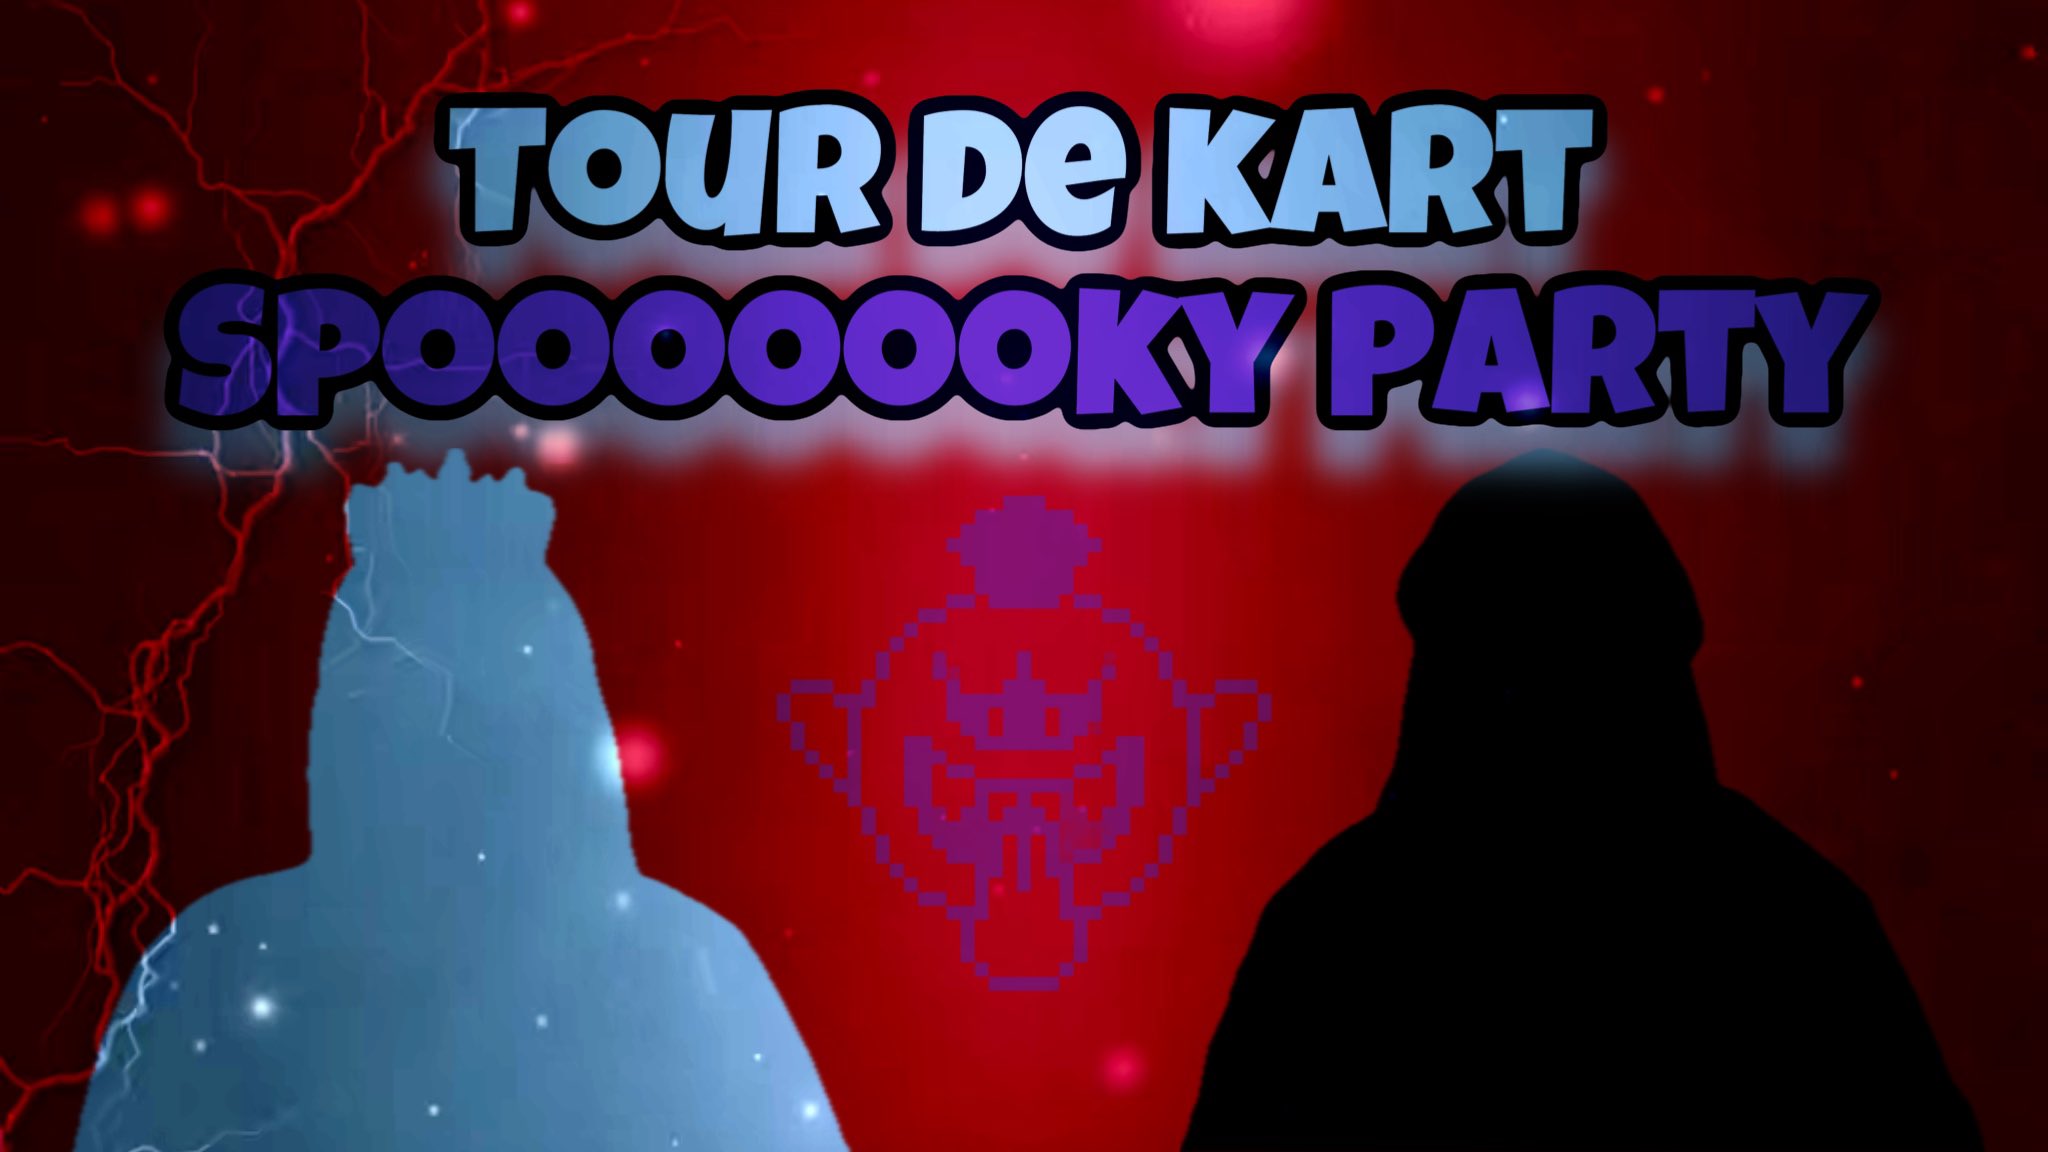 Mario Kart Tour on X: Here's a sneak peek of what's to come in # MarioKartTour! Toad and Yoshi went ahead to check out the new tour location  and sent a picture back.